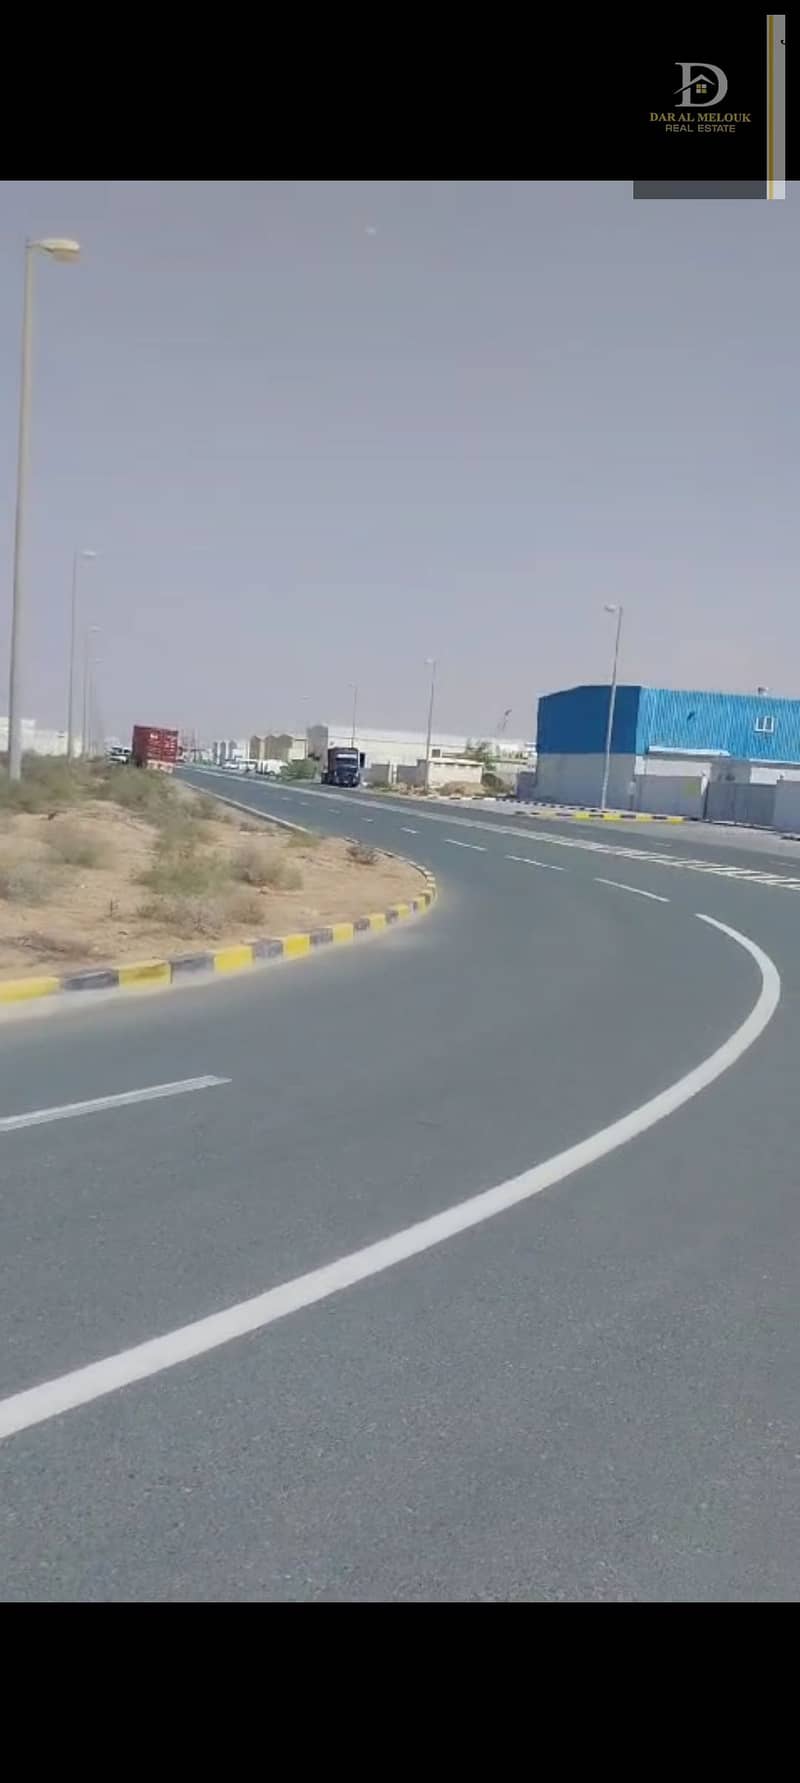 For sale in Sharjah, the old Saja’a Industrial Area, commercial land area of ​​58,000 square feet, excellent location on a main street, close to the Al Saja’a Industrial Police, on the transit Emirates City Road, a vital location, freehold, all nationalit